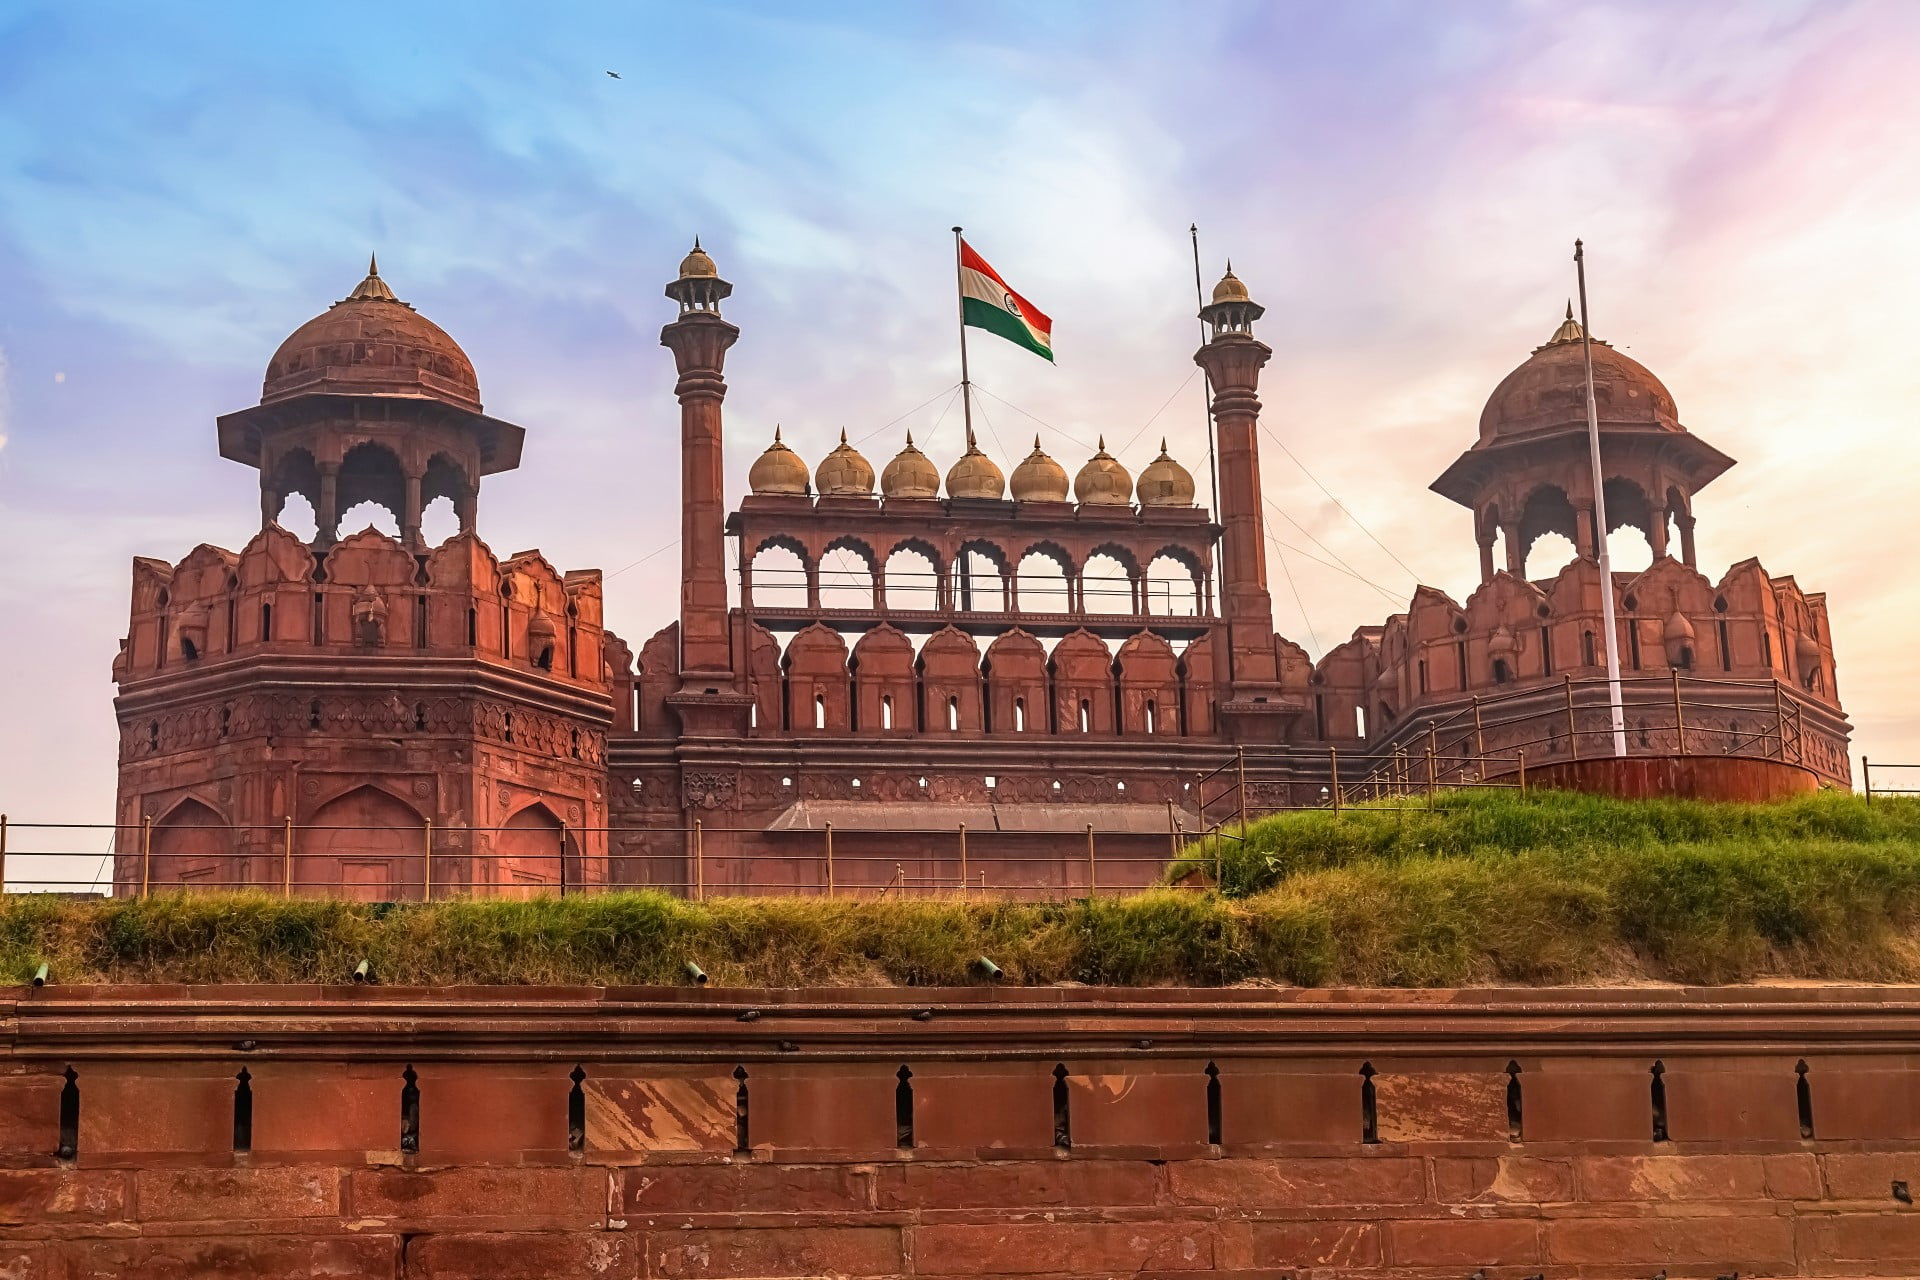 Historic Red Fort Delhi at sunrise. Red Fort is a medieval Indian architecture masterpiece designated as the UNESCO World Heritage site